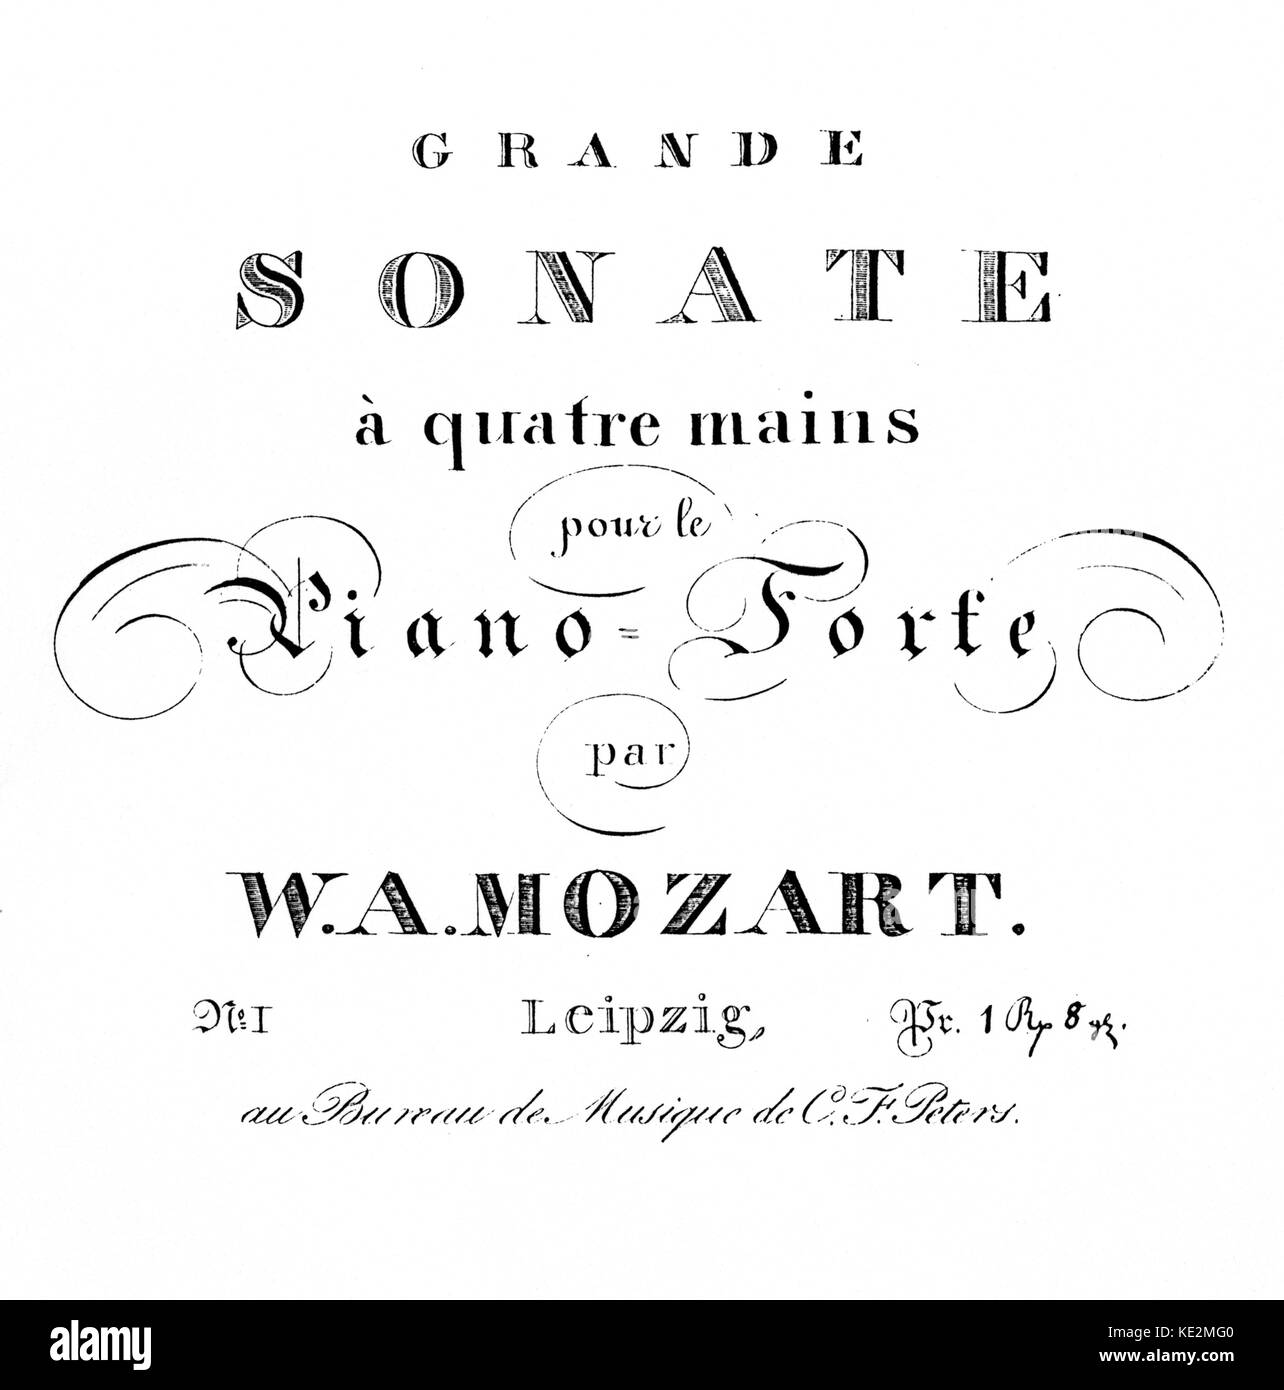 Wolfgang Amadeus Mozart - title page of the Austrian composer's Grande Sonate for the pianoforte. 27 January 1756 - 5 December 1791.  Grand Sonata Stock Photo